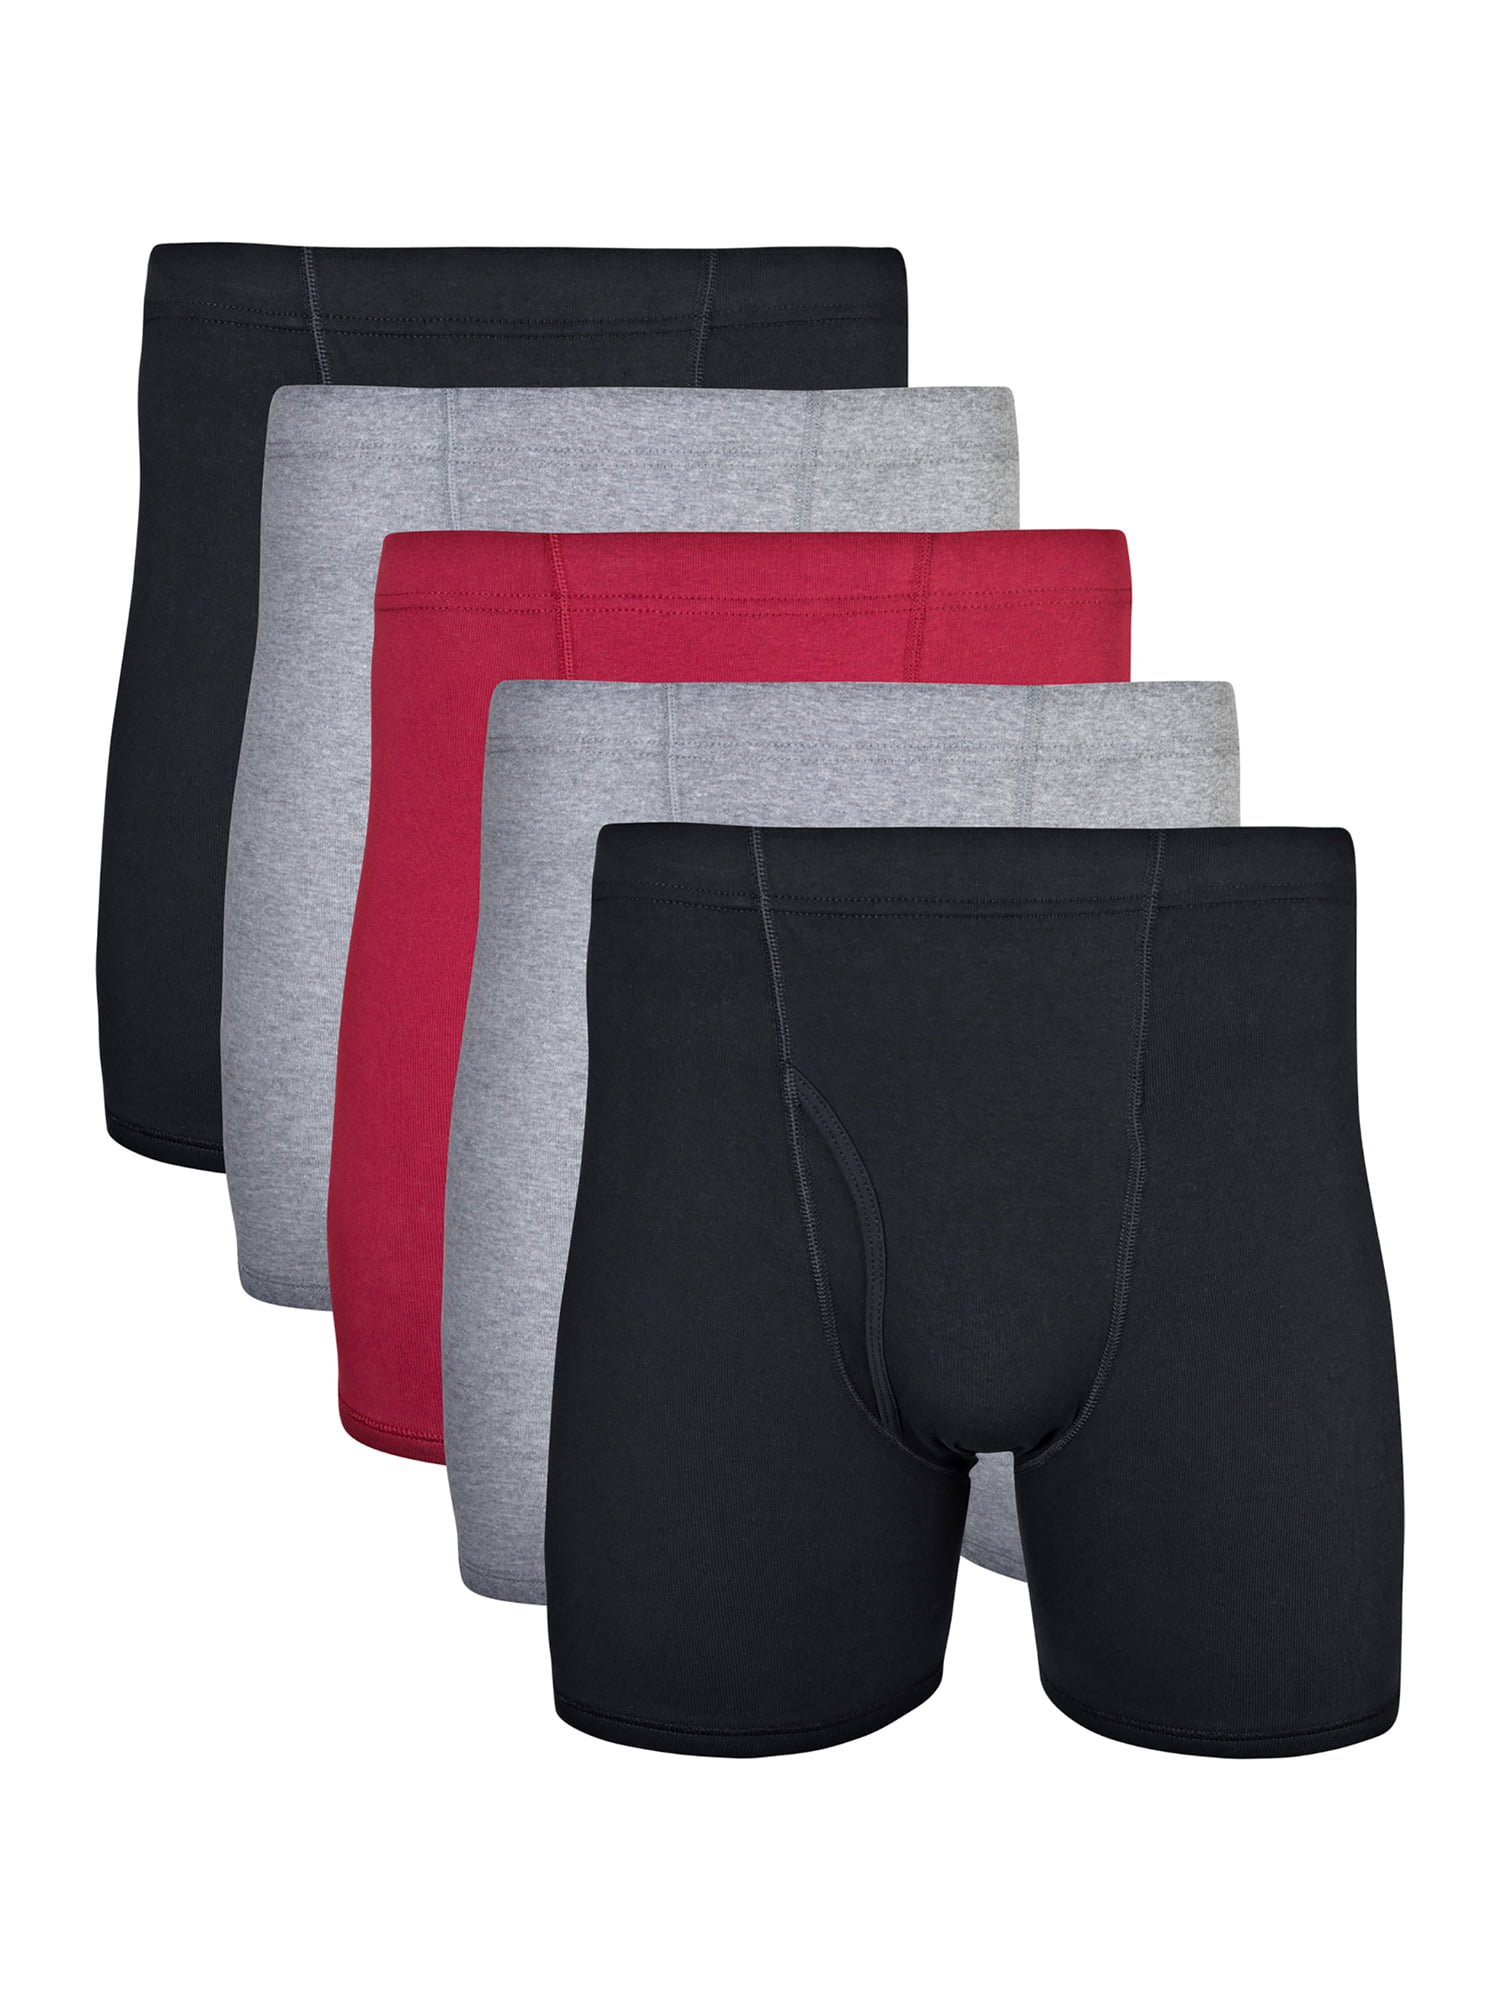 Mens 6 Pack Boxer Shorts Underwear Underpants Trunks Multipack Boxers Size S-4XL